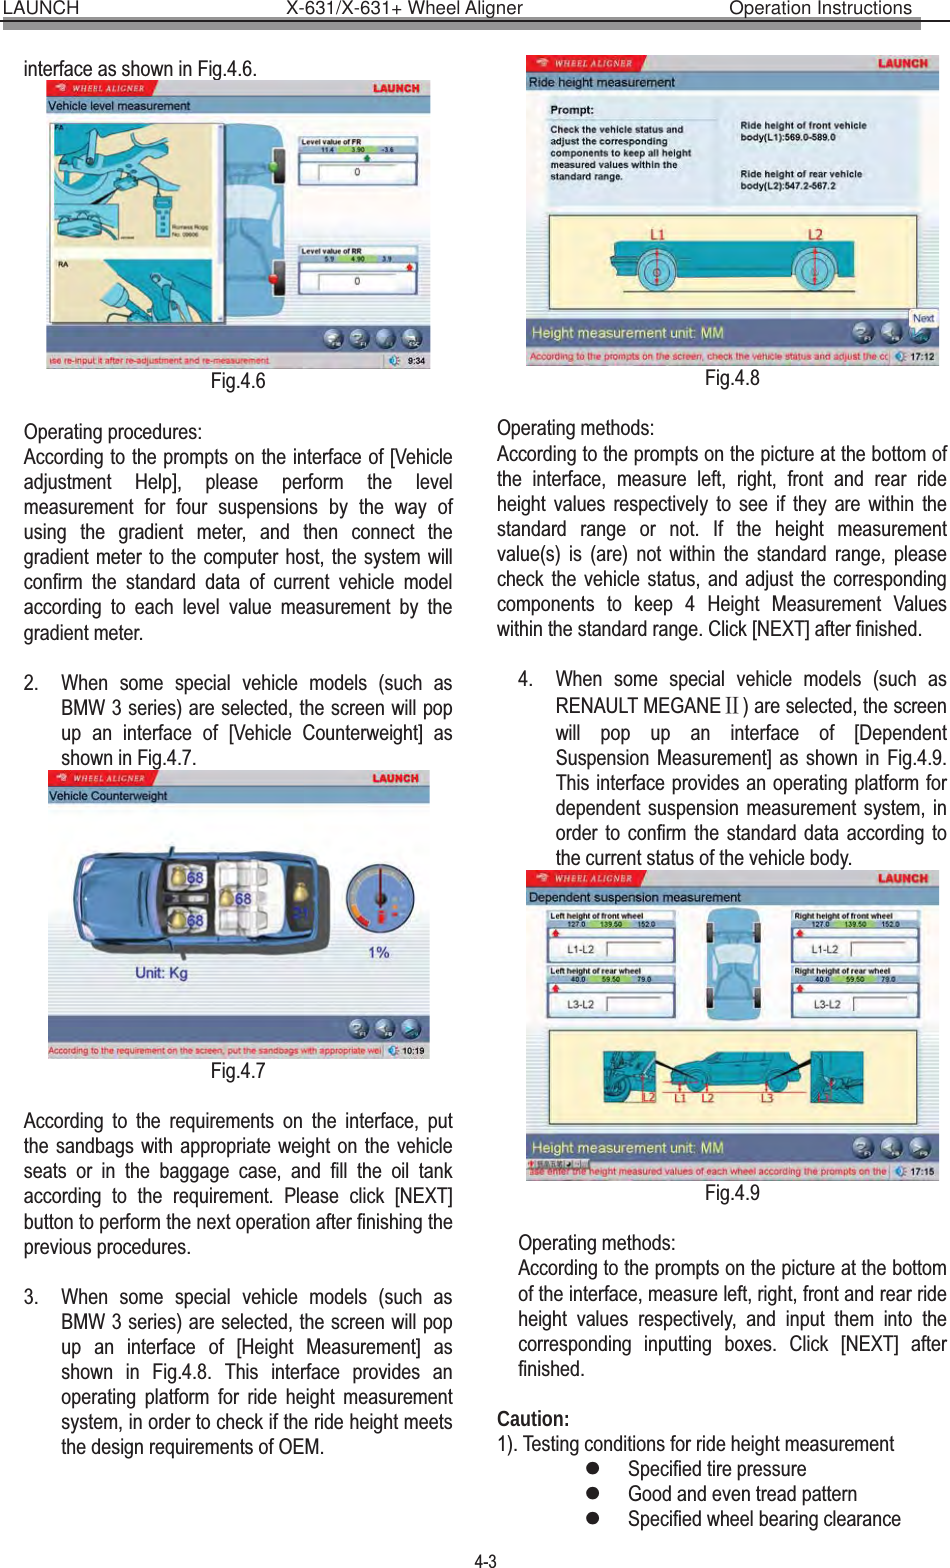 LAUNCH                      X-631/X-631+ Wheel Aligner                      Operation Instructions 4-3 interface as shown in Fig.4.6.  Fig.4.6  Operating procedures: According to the prompts on the interface of [Vehicle adjustment Help], please perform the level measurement for four suspensions by the way of using the gradient meter, and then connect the gradient meter to the computer host, the system will confirm the standard data of current vehicle model according to each level value measurement by the gradient meter.    2. When some special vehicle models (such as BMW 3 series) are selected, the screen will pop up an interface of [Vehicle Counterweight] as shown in Fig.4.7.  Fig.4.7  According to the requirements on the interface, put the sandbags with appropriate weight on the vehicle seats or in the baggage case, and fill the oil tank according to the requirement. Please click [NEXT] button to perform the next operation after finishing the previous procedures.  3. When some special vehicle models (such as BMW 3 series) are selected, the screen will pop up an interface of [Height Measurement] as shown in Fig.4.8. This interface provides an operating platform for ride height measurement system, in order to check if the ride height meets the design requirements of OEM. Fig.4.8  Operating methods: According to the prompts on the picture at the bottom of the interface, measure left, right, front and rear ride height values respectively to see if they are within the standard range or not. If the height measurement value(s) is (are) not within the standard range, please check the vehicle status, and adjust the corresponding components to keep 4 Height Measurement Values within the standard range. Click [NEXT] after finished.  4. When some special vehicle models (such as RENAULT MEGANEĊ) are selected, the screen will pop up an interface of [Dependent Suspension Measurement] as shown in Fig.4.9. This interface provides an operating platform for dependent suspension measurement system, in order to confirm the standard data according to the current status of the vehicle body.  Fig.4.9  Operating methods: According to the prompts on the picture at the bottom of the interface, measure left, right, front and rear ride height values respectively, and input them into the corresponding inputting boxes. Click [NEXT] after finished.  Caution: 1). Testing conditions for ride height measurement   zSpecified tire pressure zGood and even tread pattern   zSpecified wheel bearing clearance 